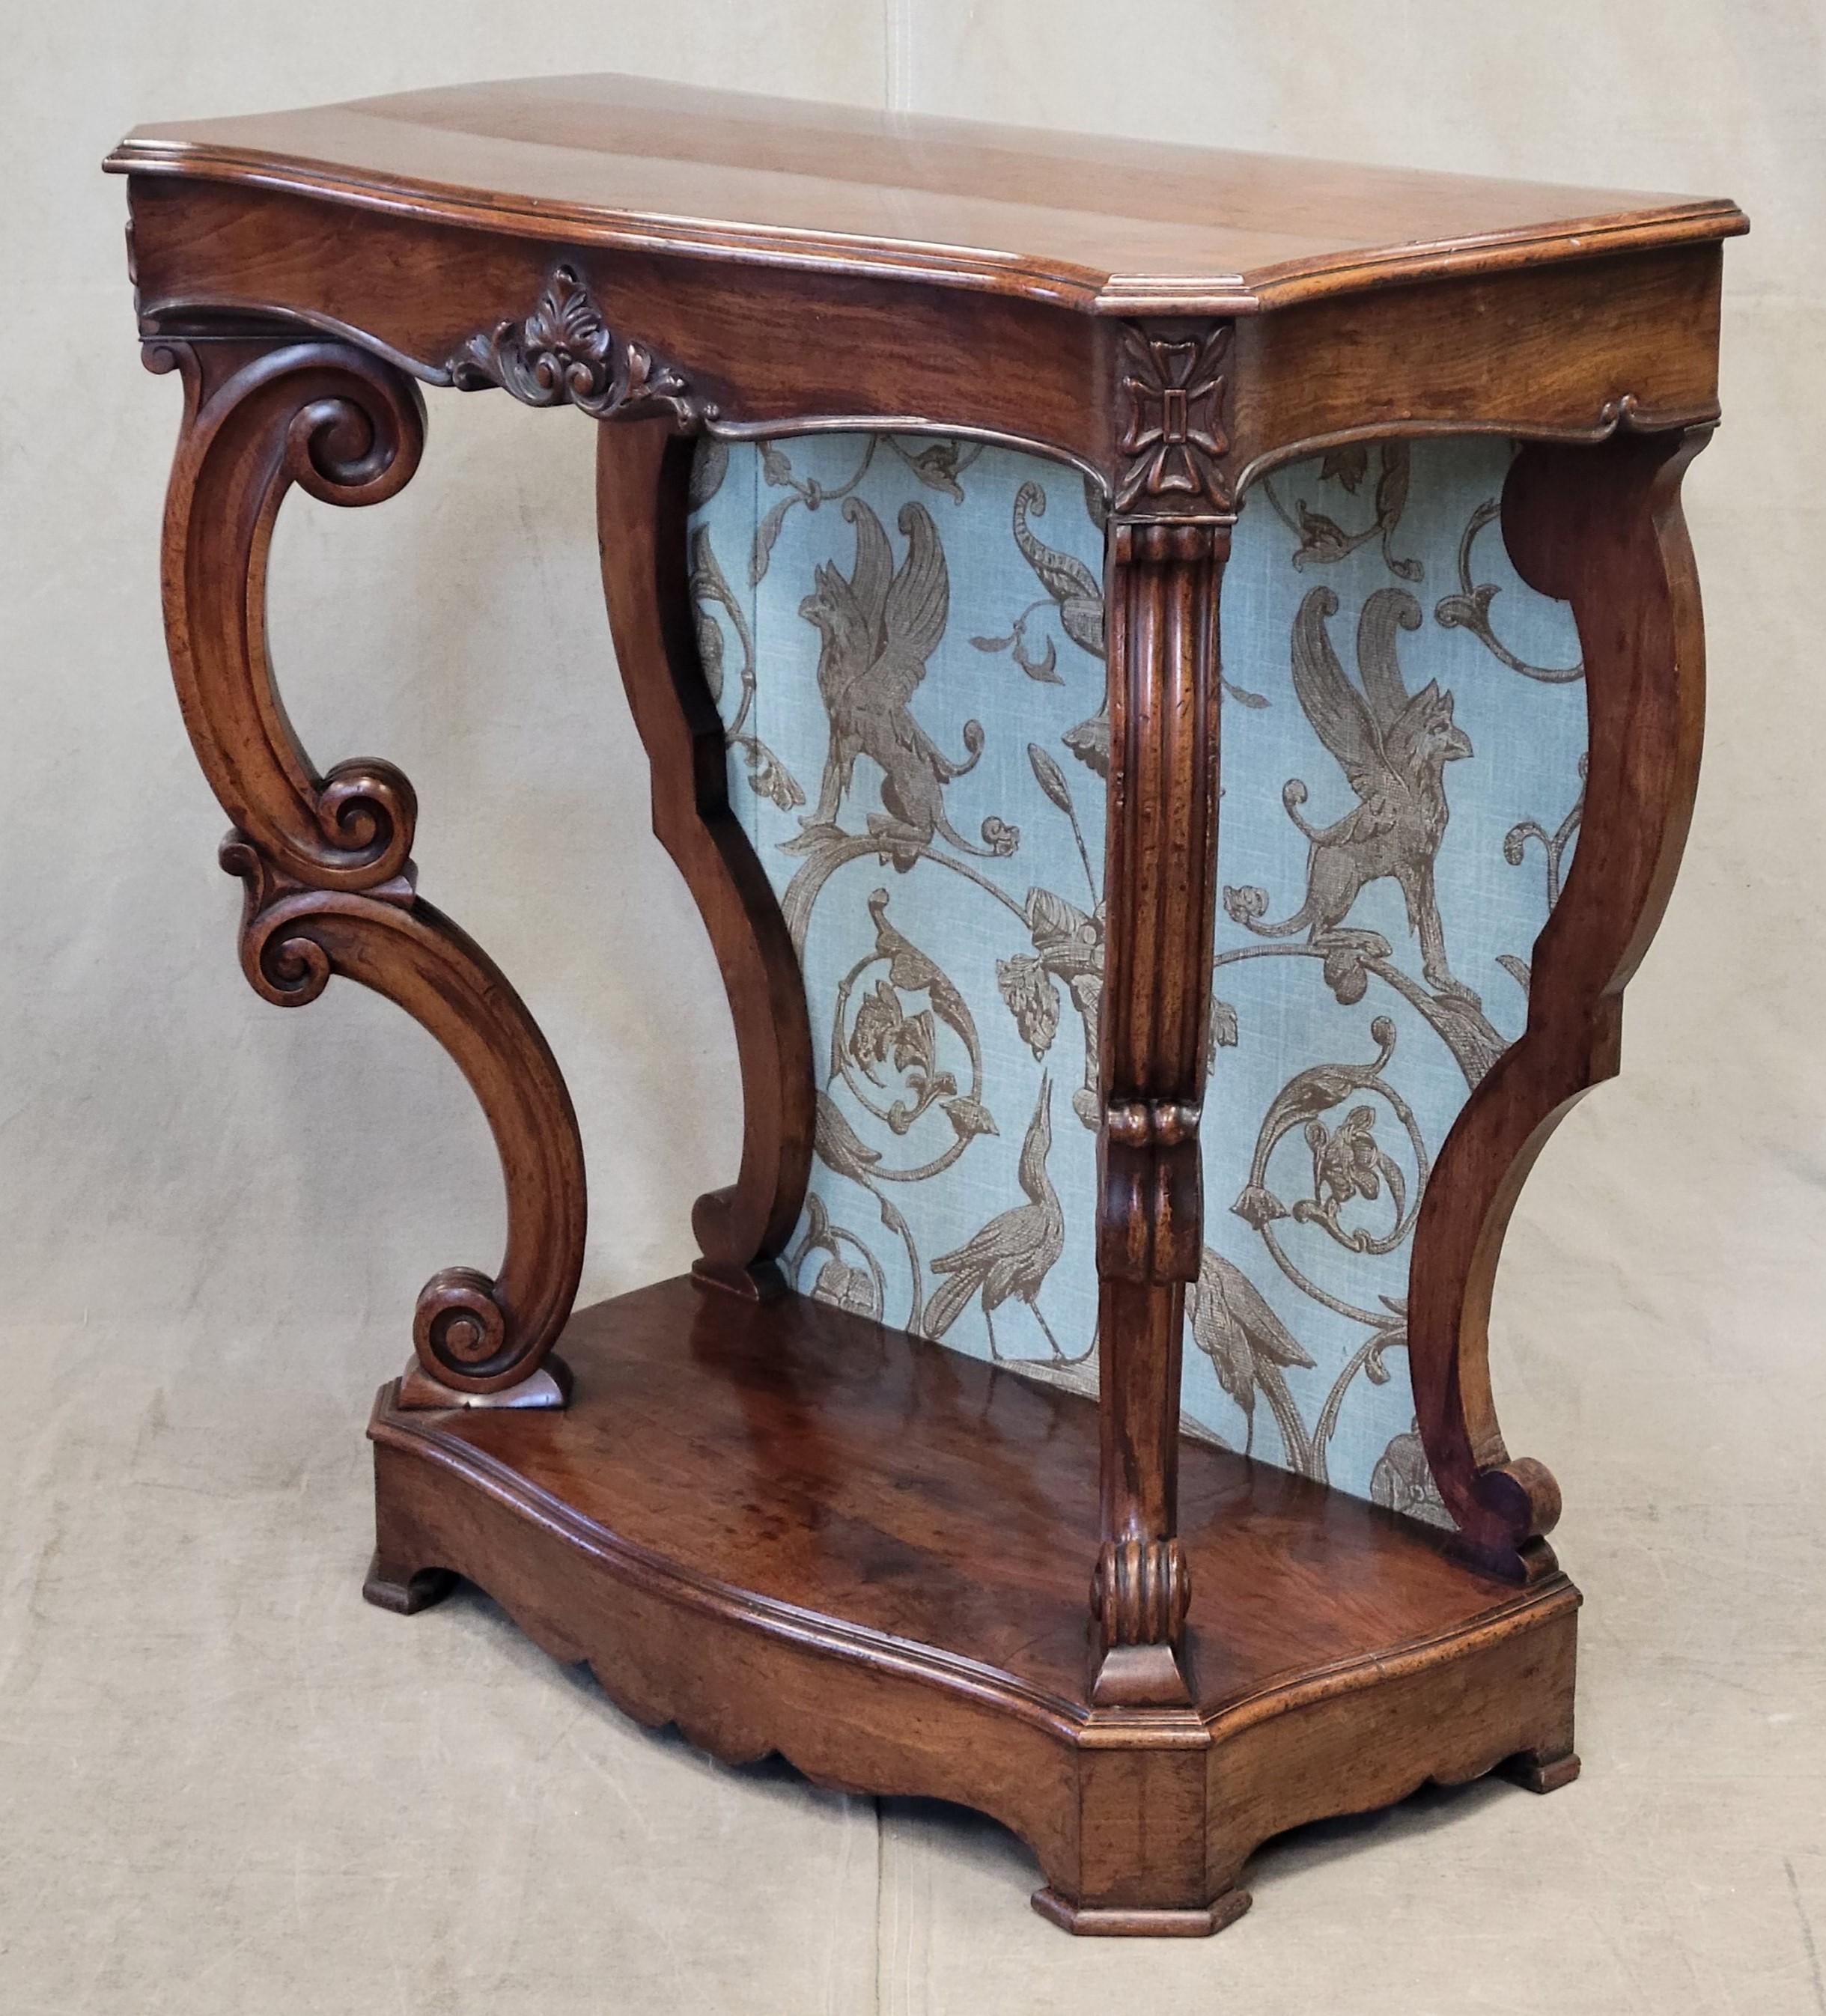 A gorgeous, antique European late 1800s (or perhaps earlier) hall or entryway console table in the Louis Phillipe style. The Thibaut 